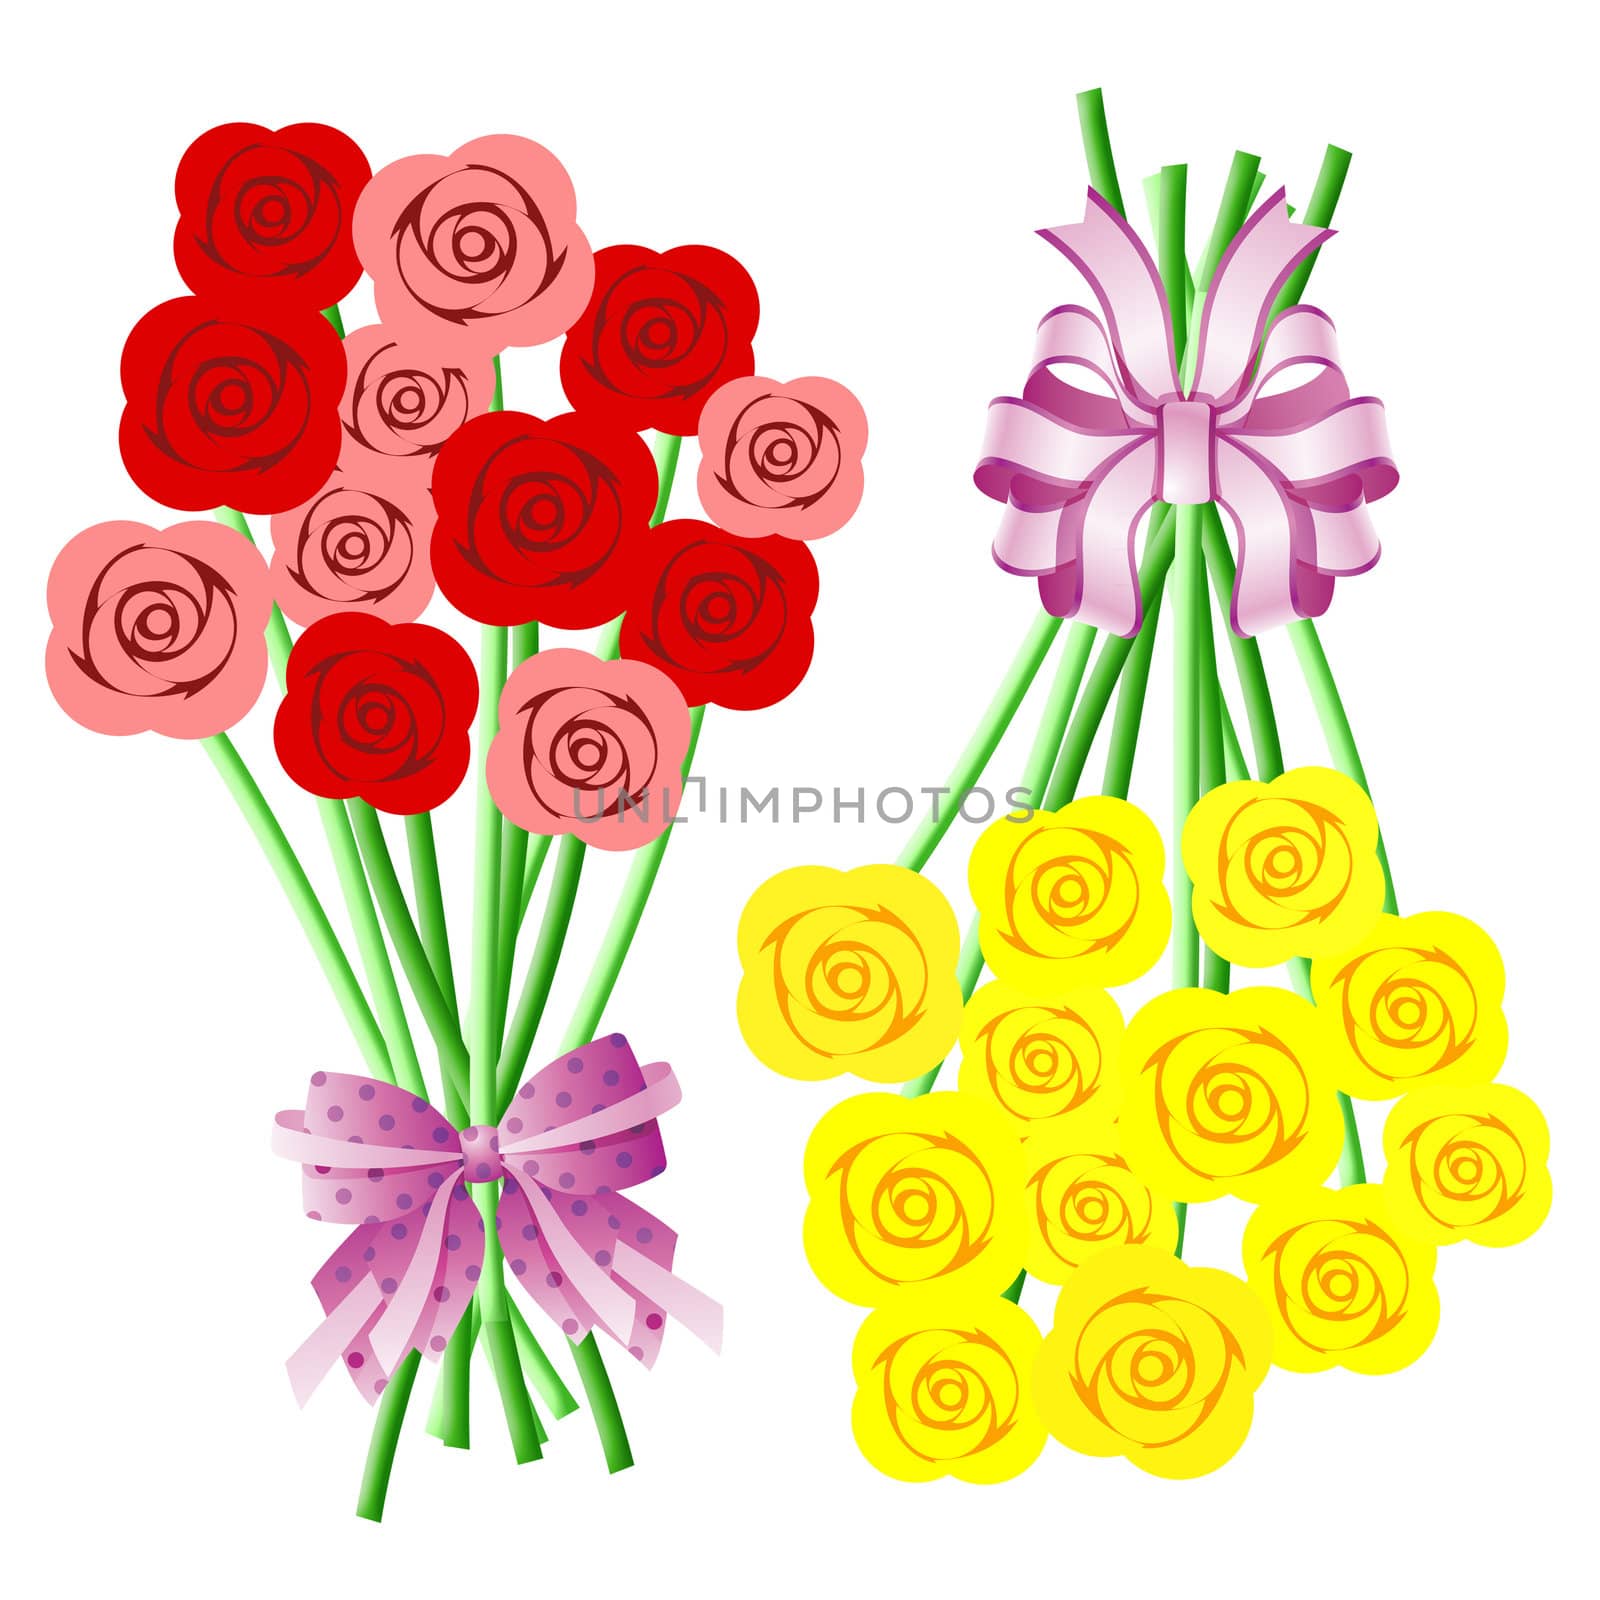 Bouquets of Red Pink Yellow Roses with Bows and Ribbons Illustration